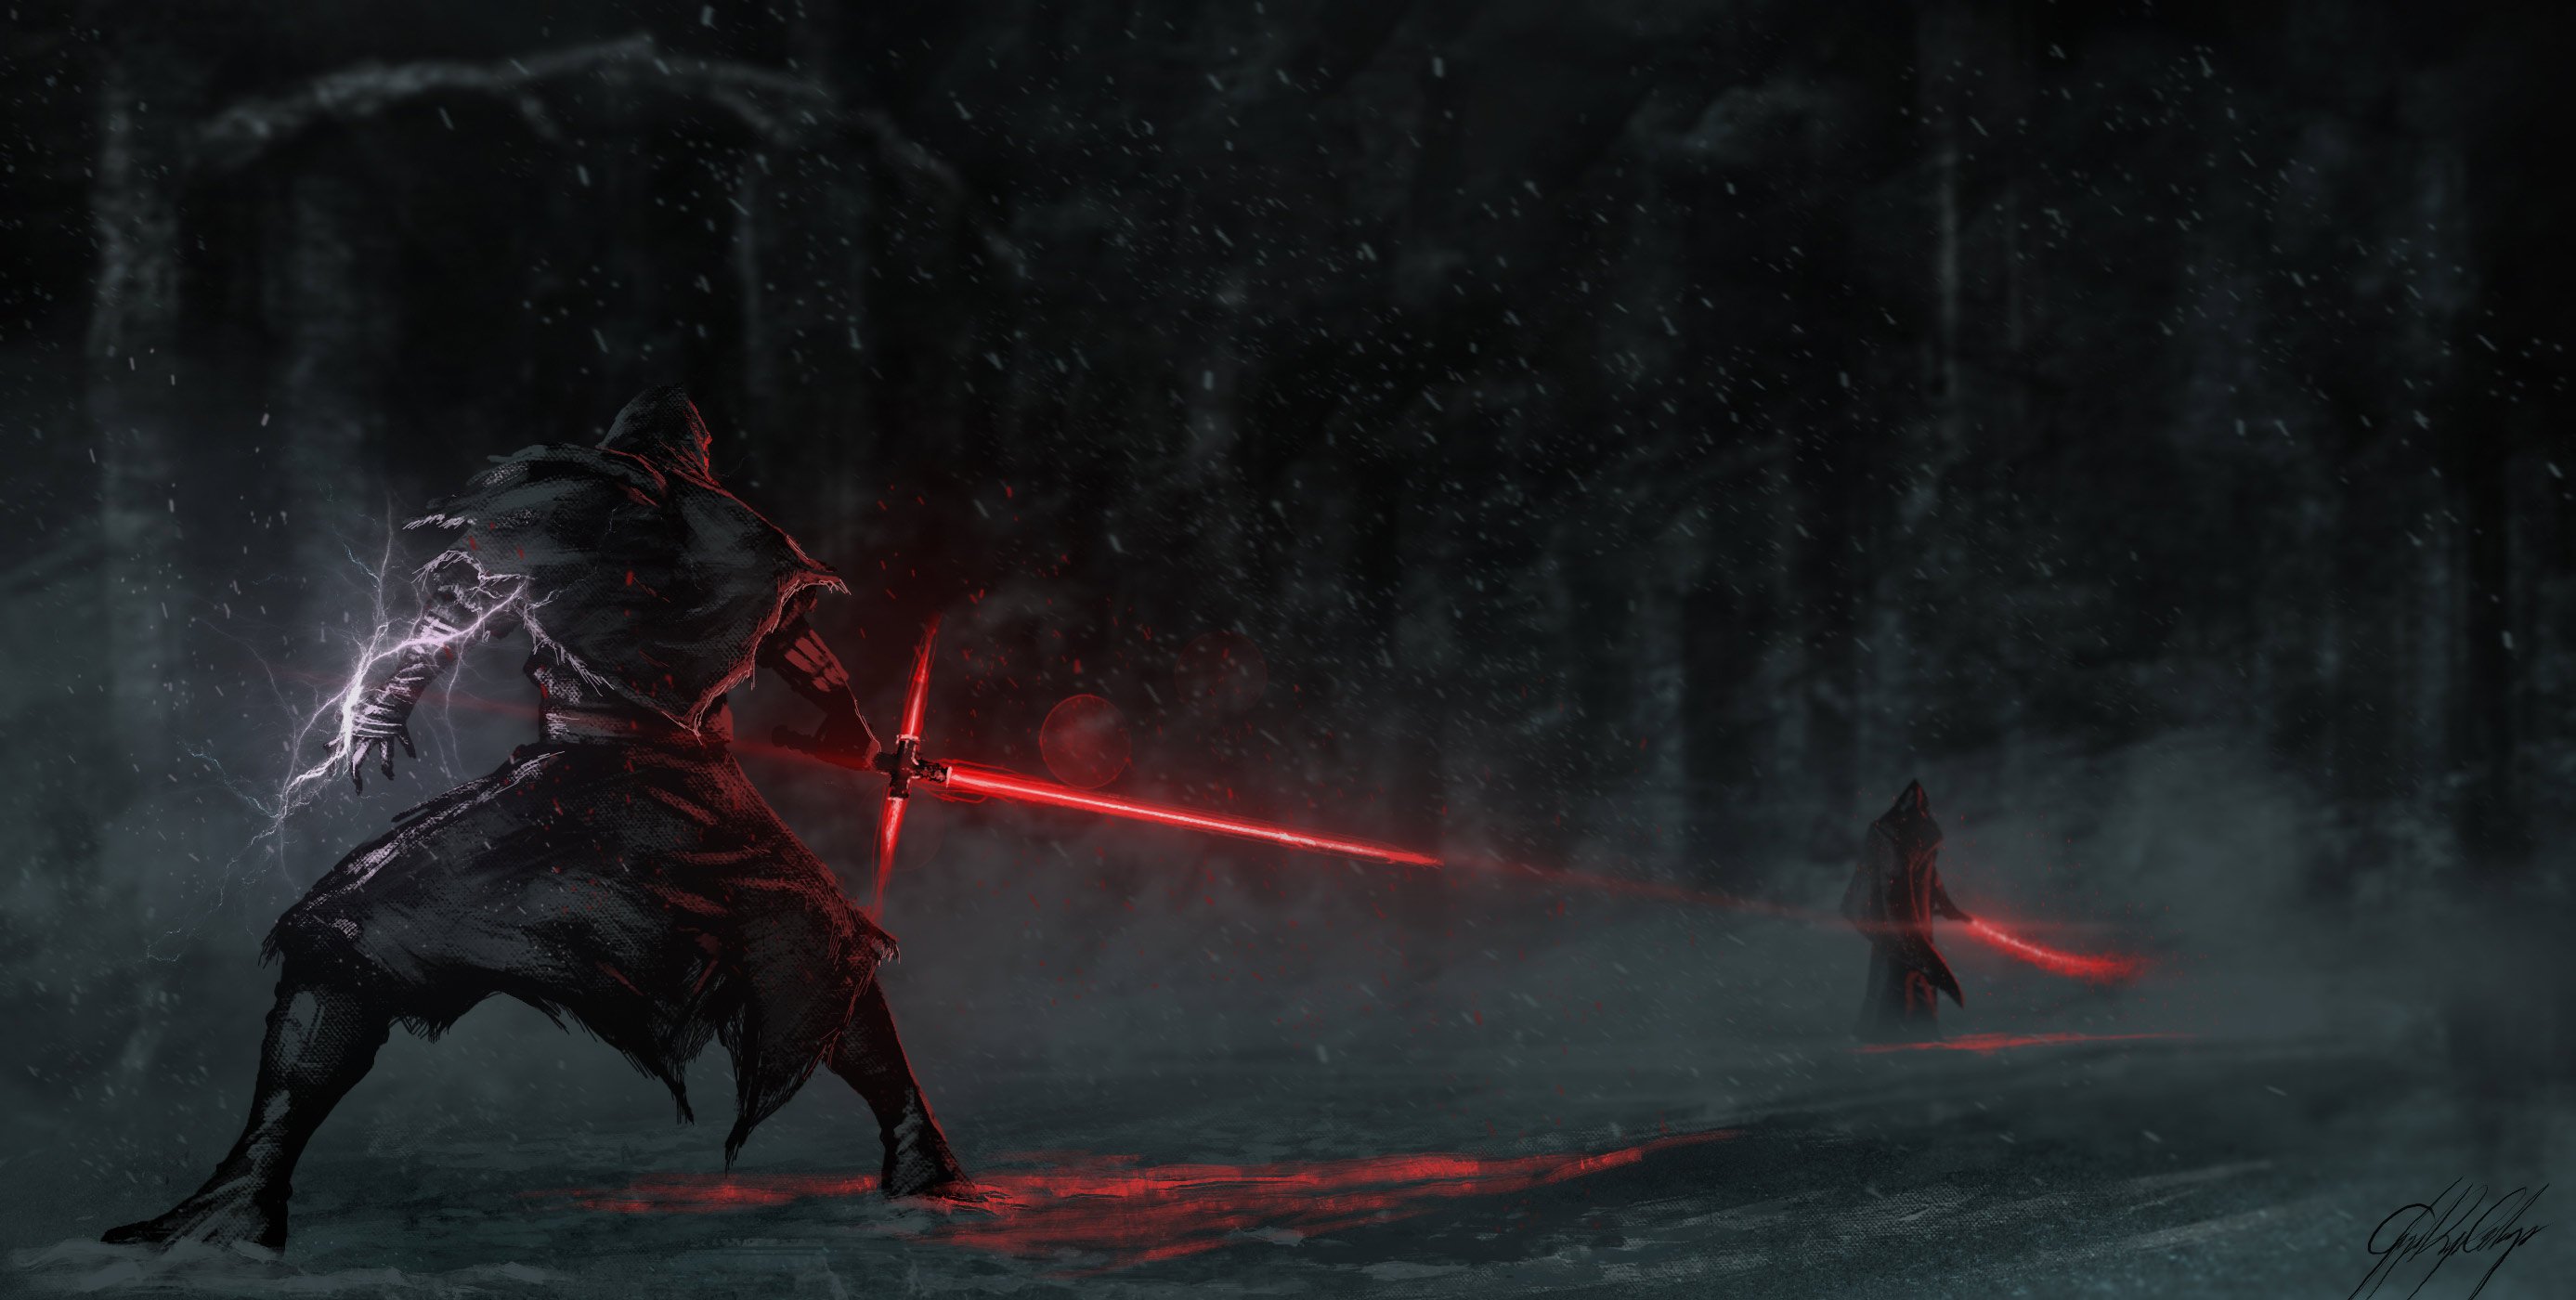  Friday Star Wars VII The Force Awakens by techgnotic 2774x1400